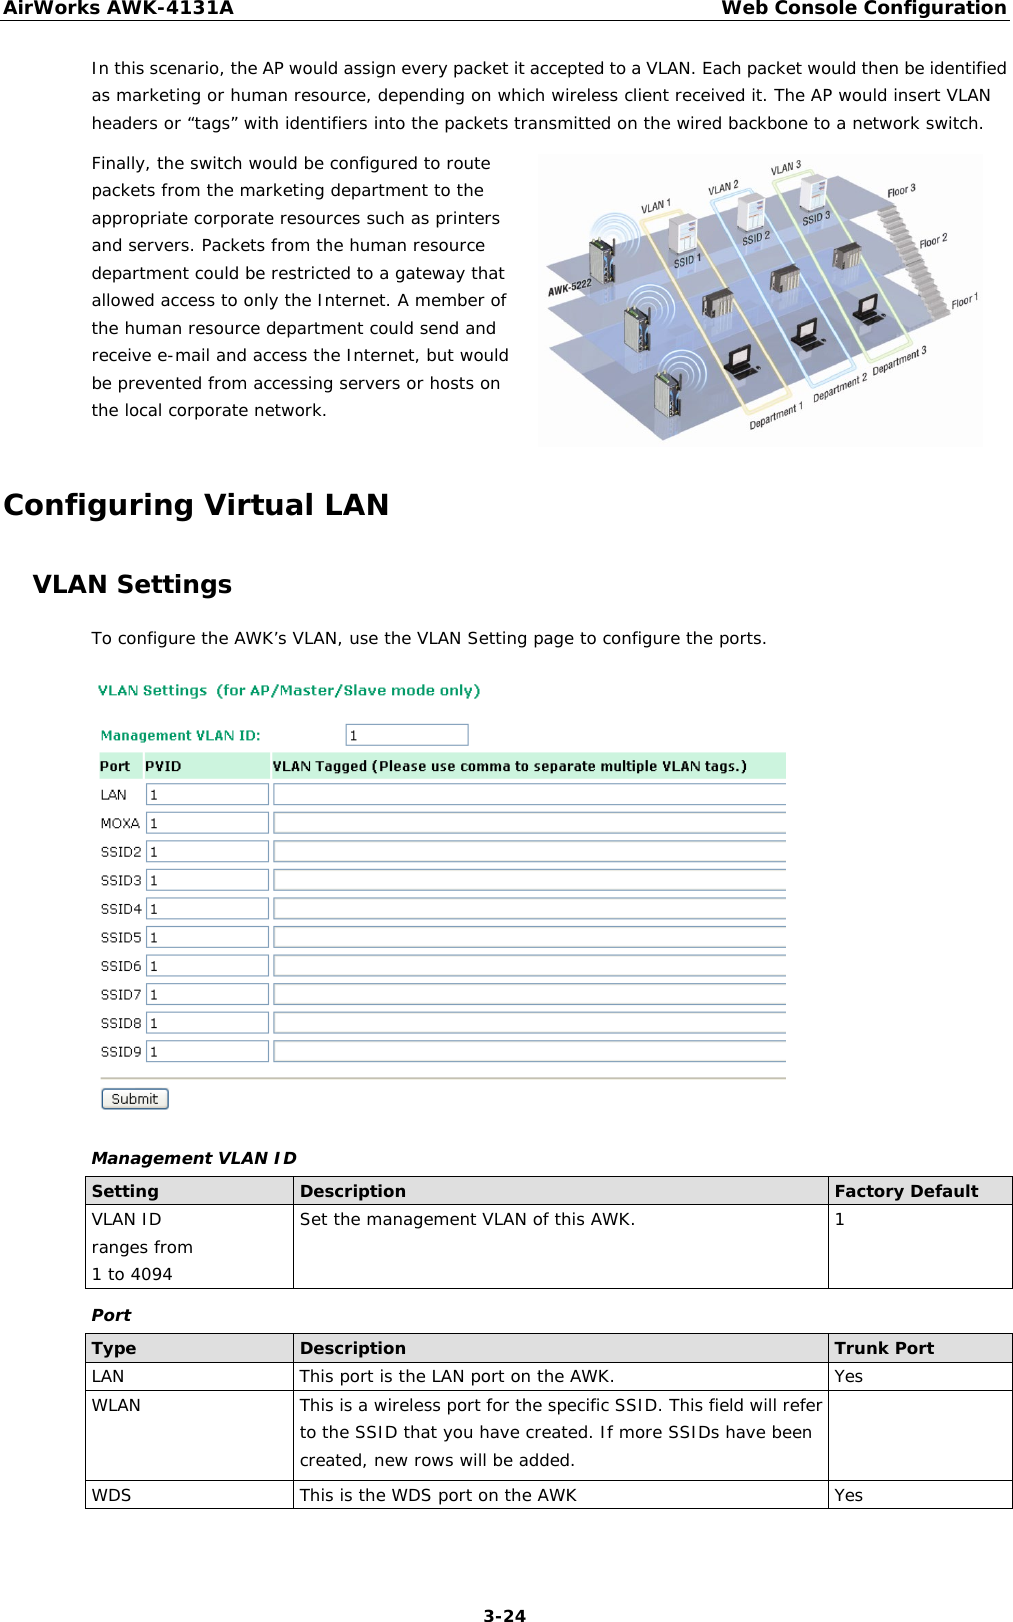 AirWorks AWK-4131A Web Console Configuration  3-24 In this scenario, the AP would assign every packet it accepted to a VLAN. Each packet would then be identified as marketing or human resource, depending on which wireless client received it. The AP would insert VLAN headers or “tags” with identifiers into the packets transmitted on the wired backbone to a network switch. Finally, the switch would be configured to route packets from the marketing department to the appropriate corporate resources such as printers and servers. Packets from the human resource department could be restricted to a gateway that allowed access to only the Internet. A member of the human resource department could send and receive e-mail and access the Internet, but would be prevented from accessing servers or hosts on the local corporate network.  Configuring Virtual LAN VLAN Settings To configure the AWK’s VLAN, use the VLAN Setting page to configure the ports.  Management VLAN ID Setting Description Factory Default VLAN ID ranges from 1 to 4094 Set the management VLAN of this AWK.  1 Port Type Description Trunk Port LAN  This port is the LAN port on the AWK. Yes WLAN  This is a wireless port for the specific SSID. This field will refer to the SSID that you have created. If more SSIDs have been created, new rows will be added.  WDS This is the WDS port on the AWK Yes 